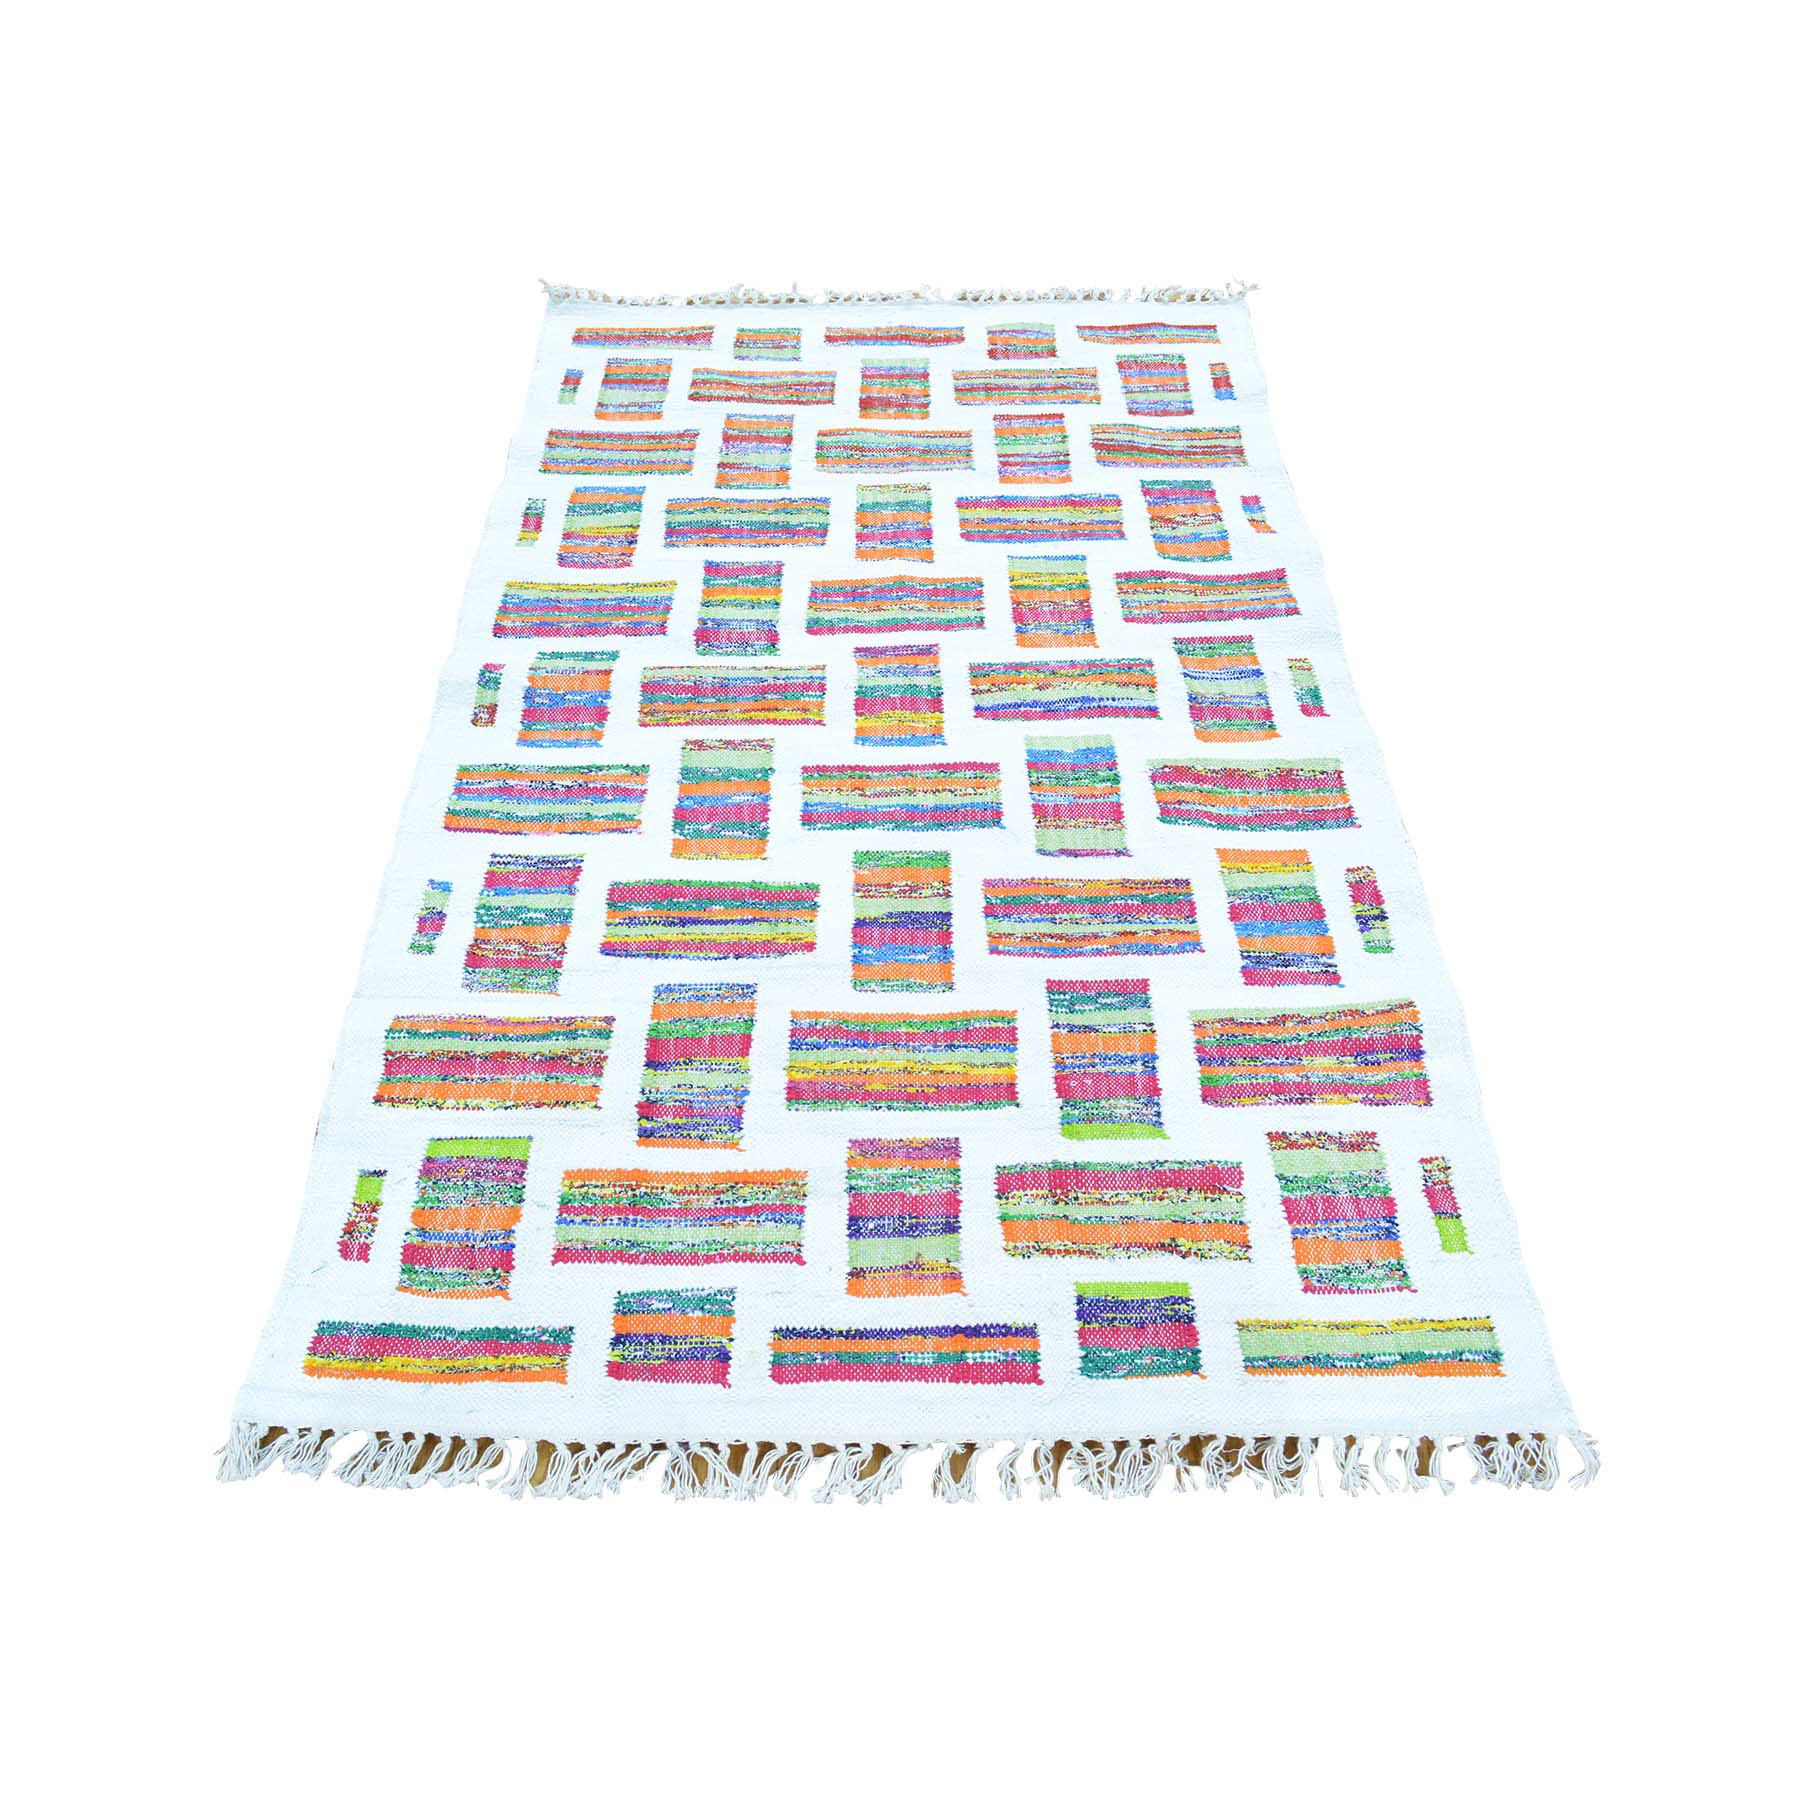 3-4 x6- Pure Cotton Recycled Clothes Kilim Hand-Woven Oriental Rug 